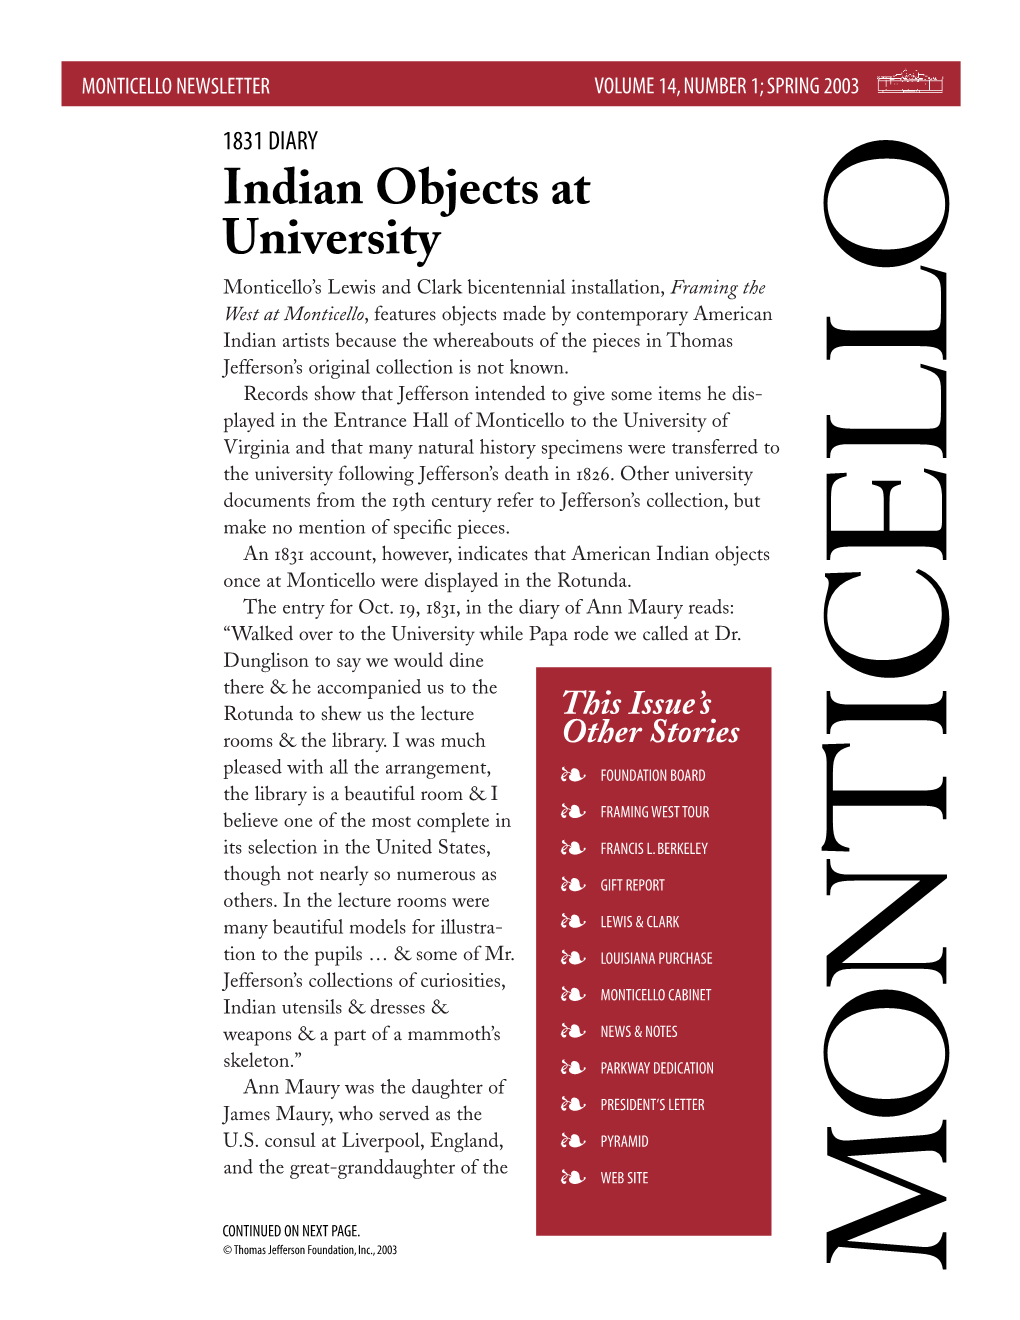 Indian Objects at University of Virginia